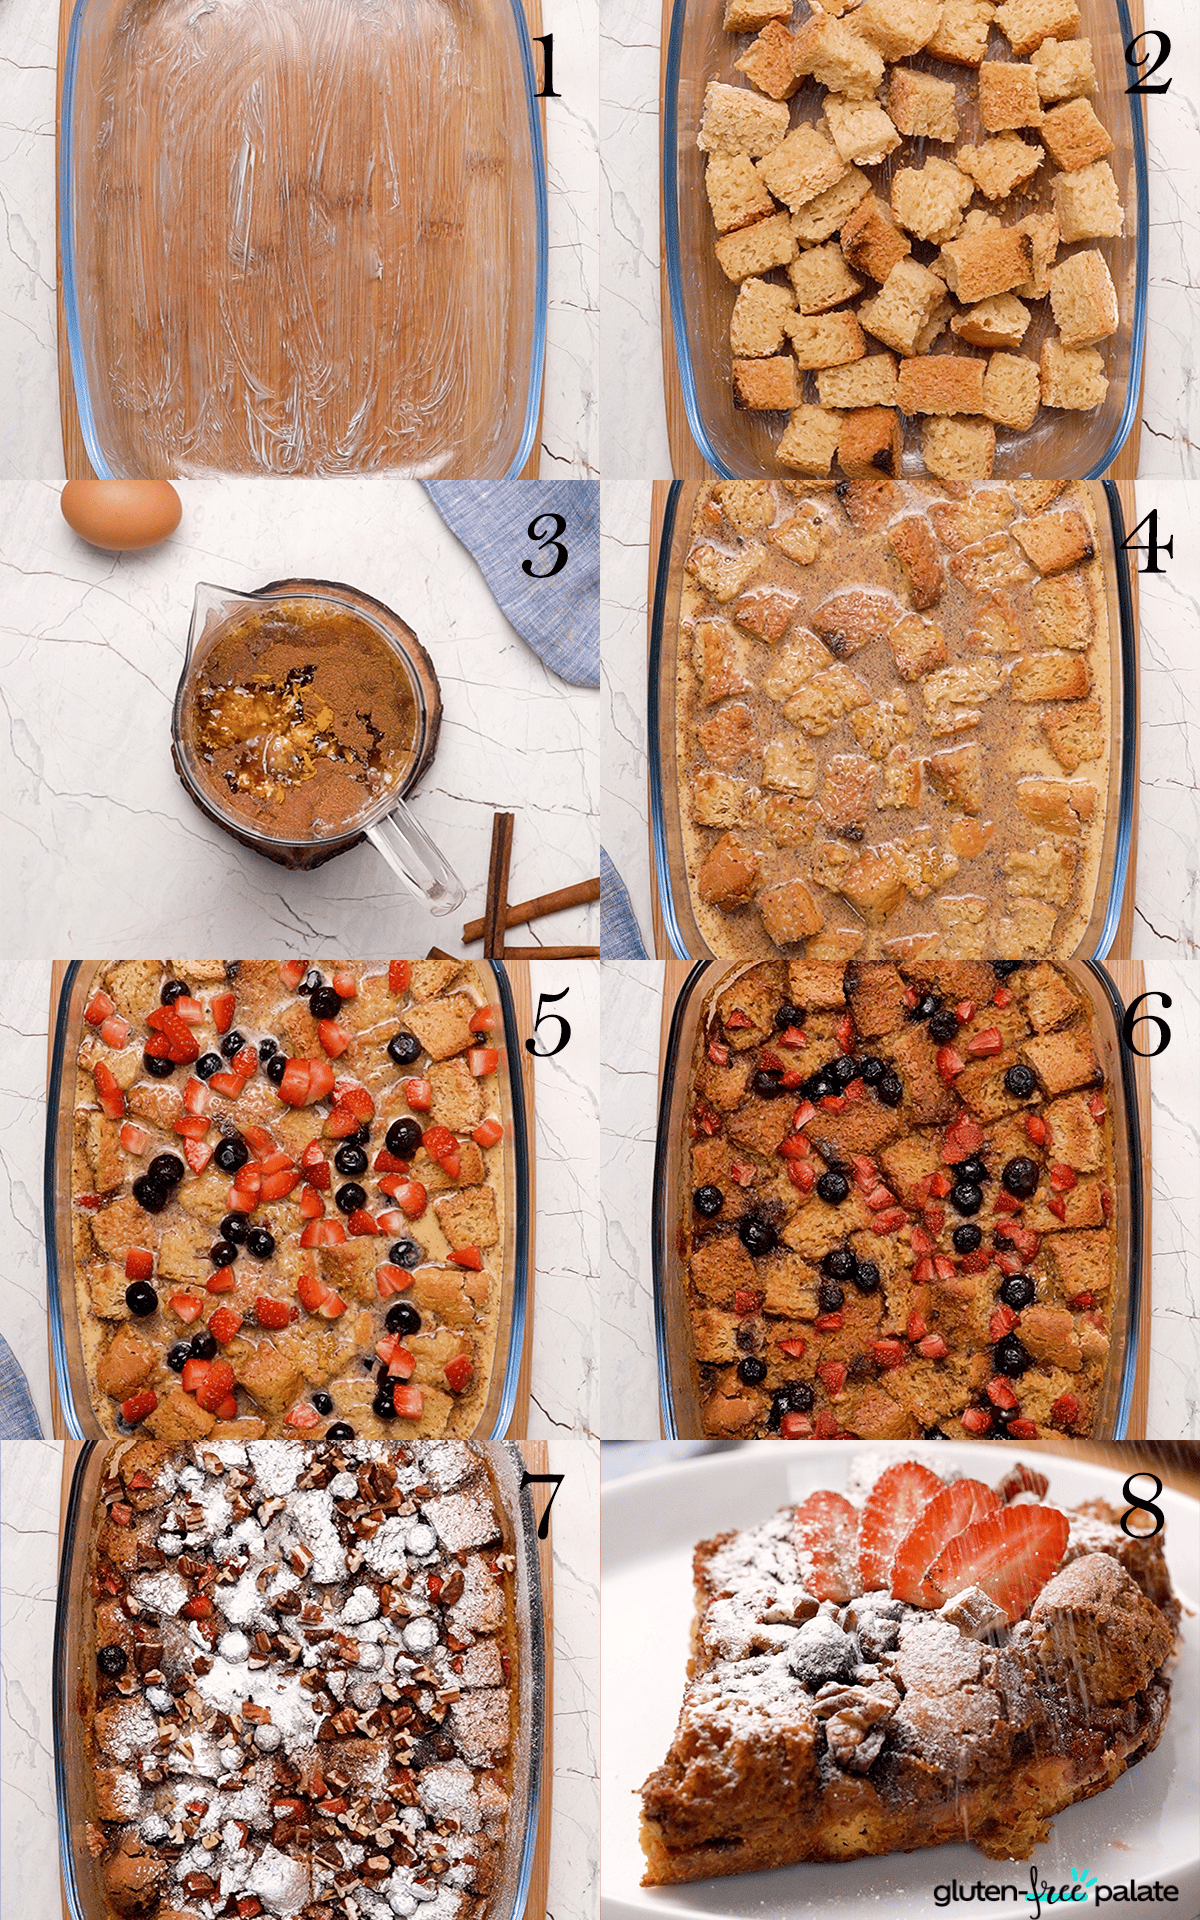 gluten-free French toast casserole step by step.